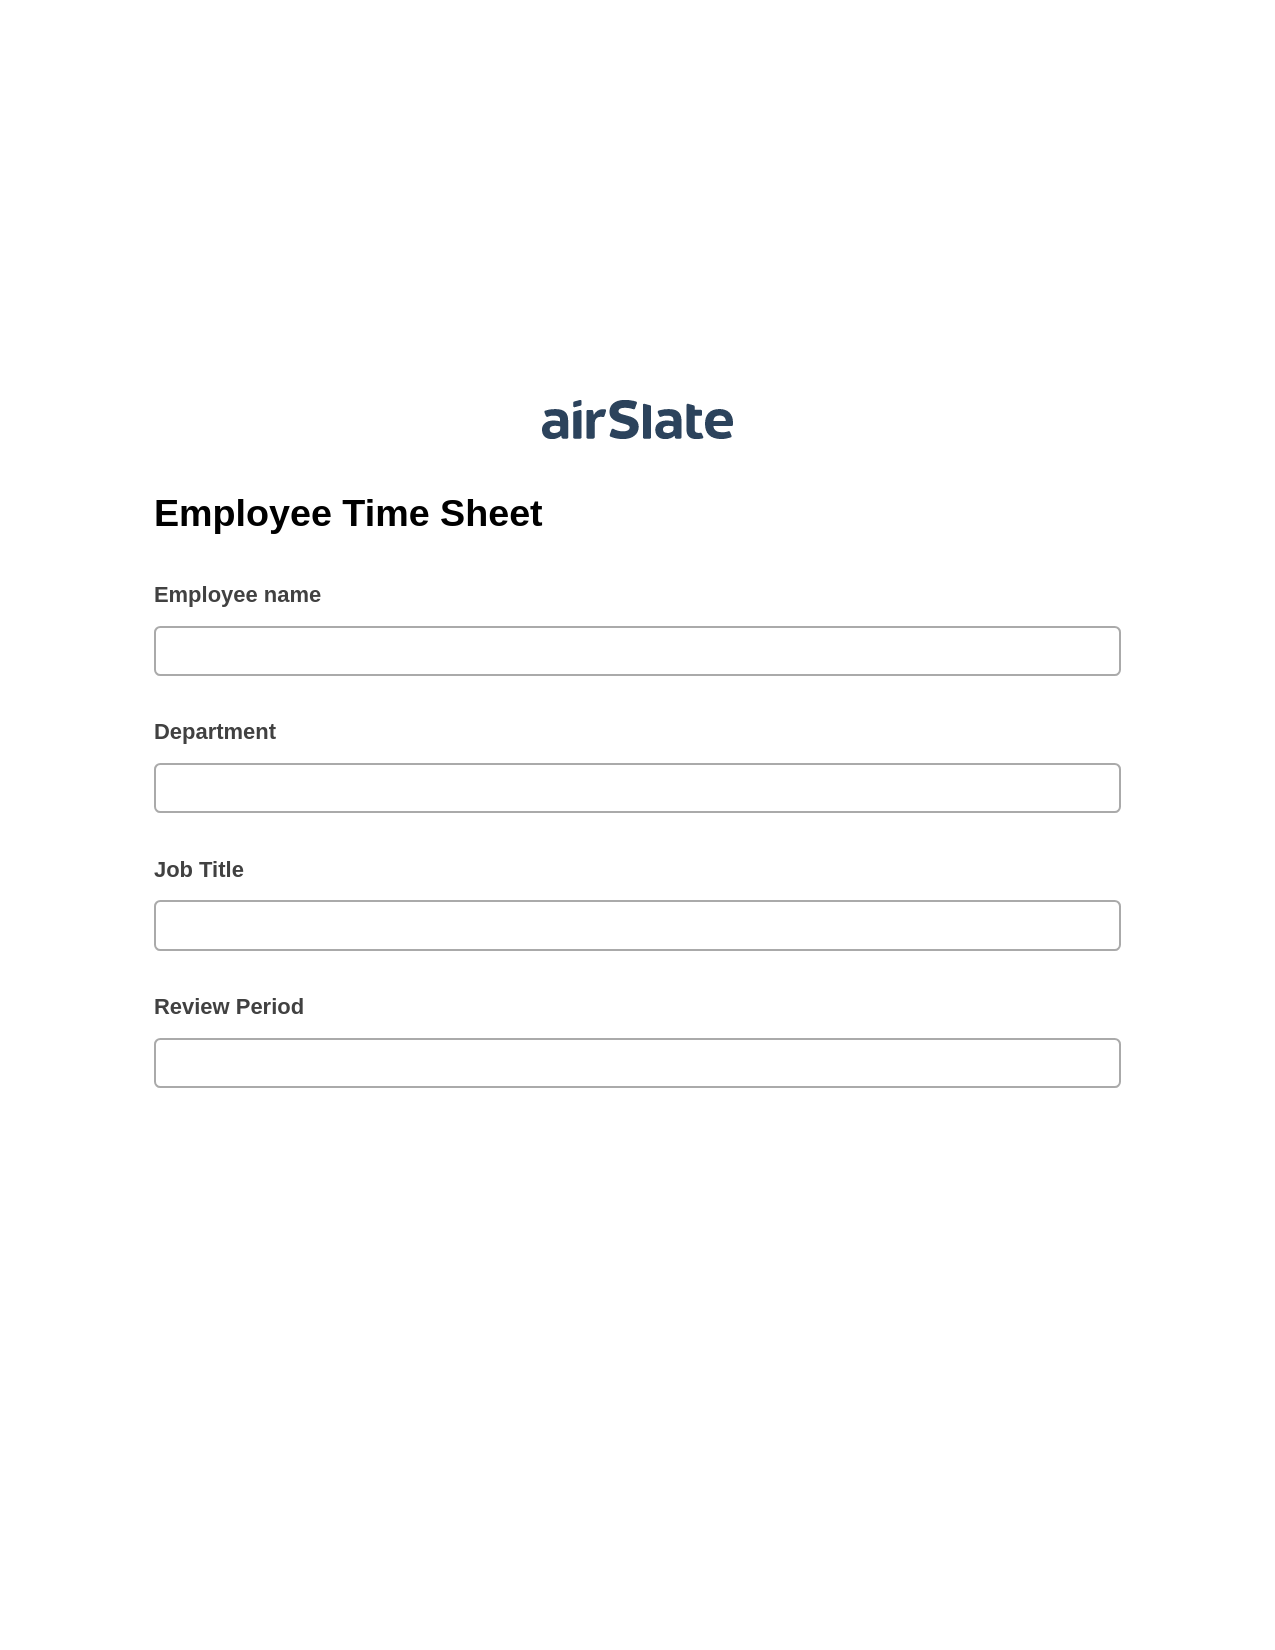 Multirole Employee Time Sheet System Bot - Slack Two-Way Binding Bot, Assign Roles to Recipients Bot, Export to Excel 365 Bot